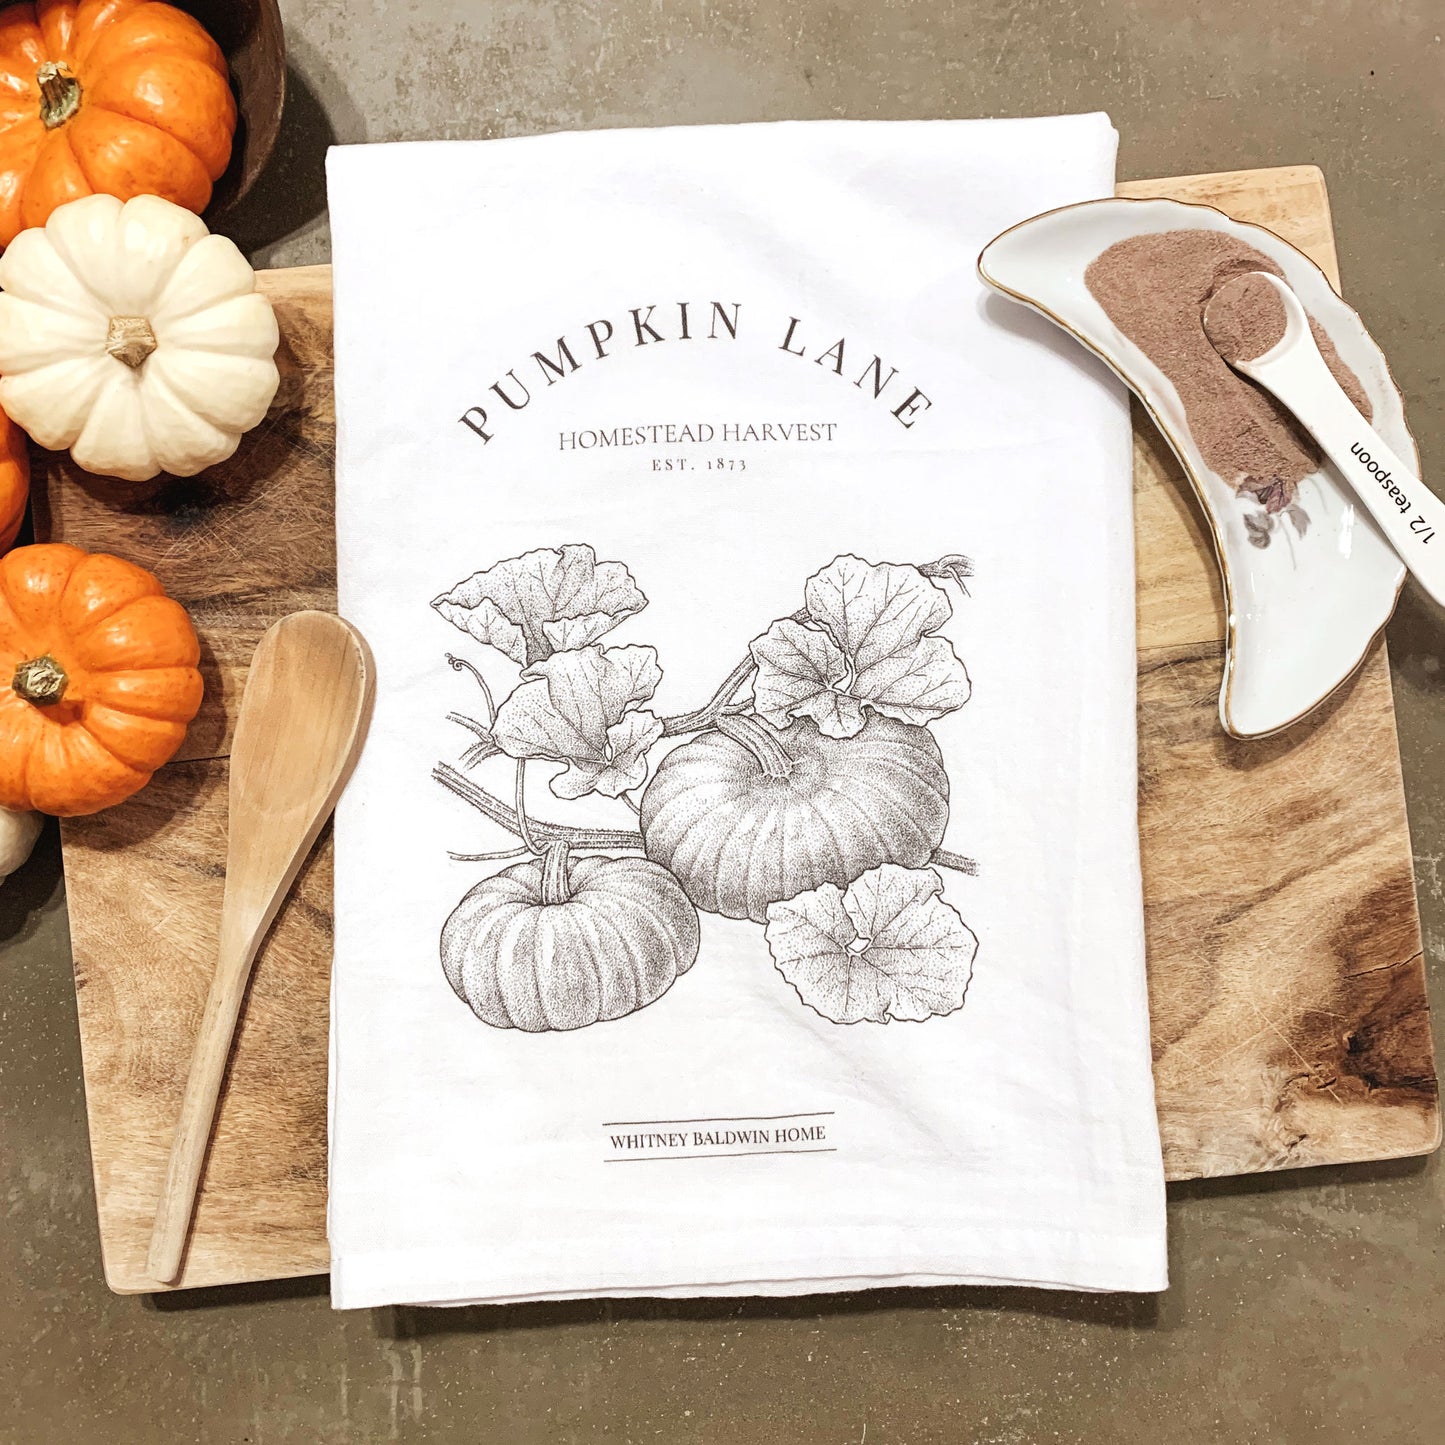 Homestead Harvest Pumpkin Lane Tea Towel. This tea towel is displayed with mini pumpkins on a cutting board with spatula and cocoa mix. The pumpkin illustration is of a small pumpkin patch 